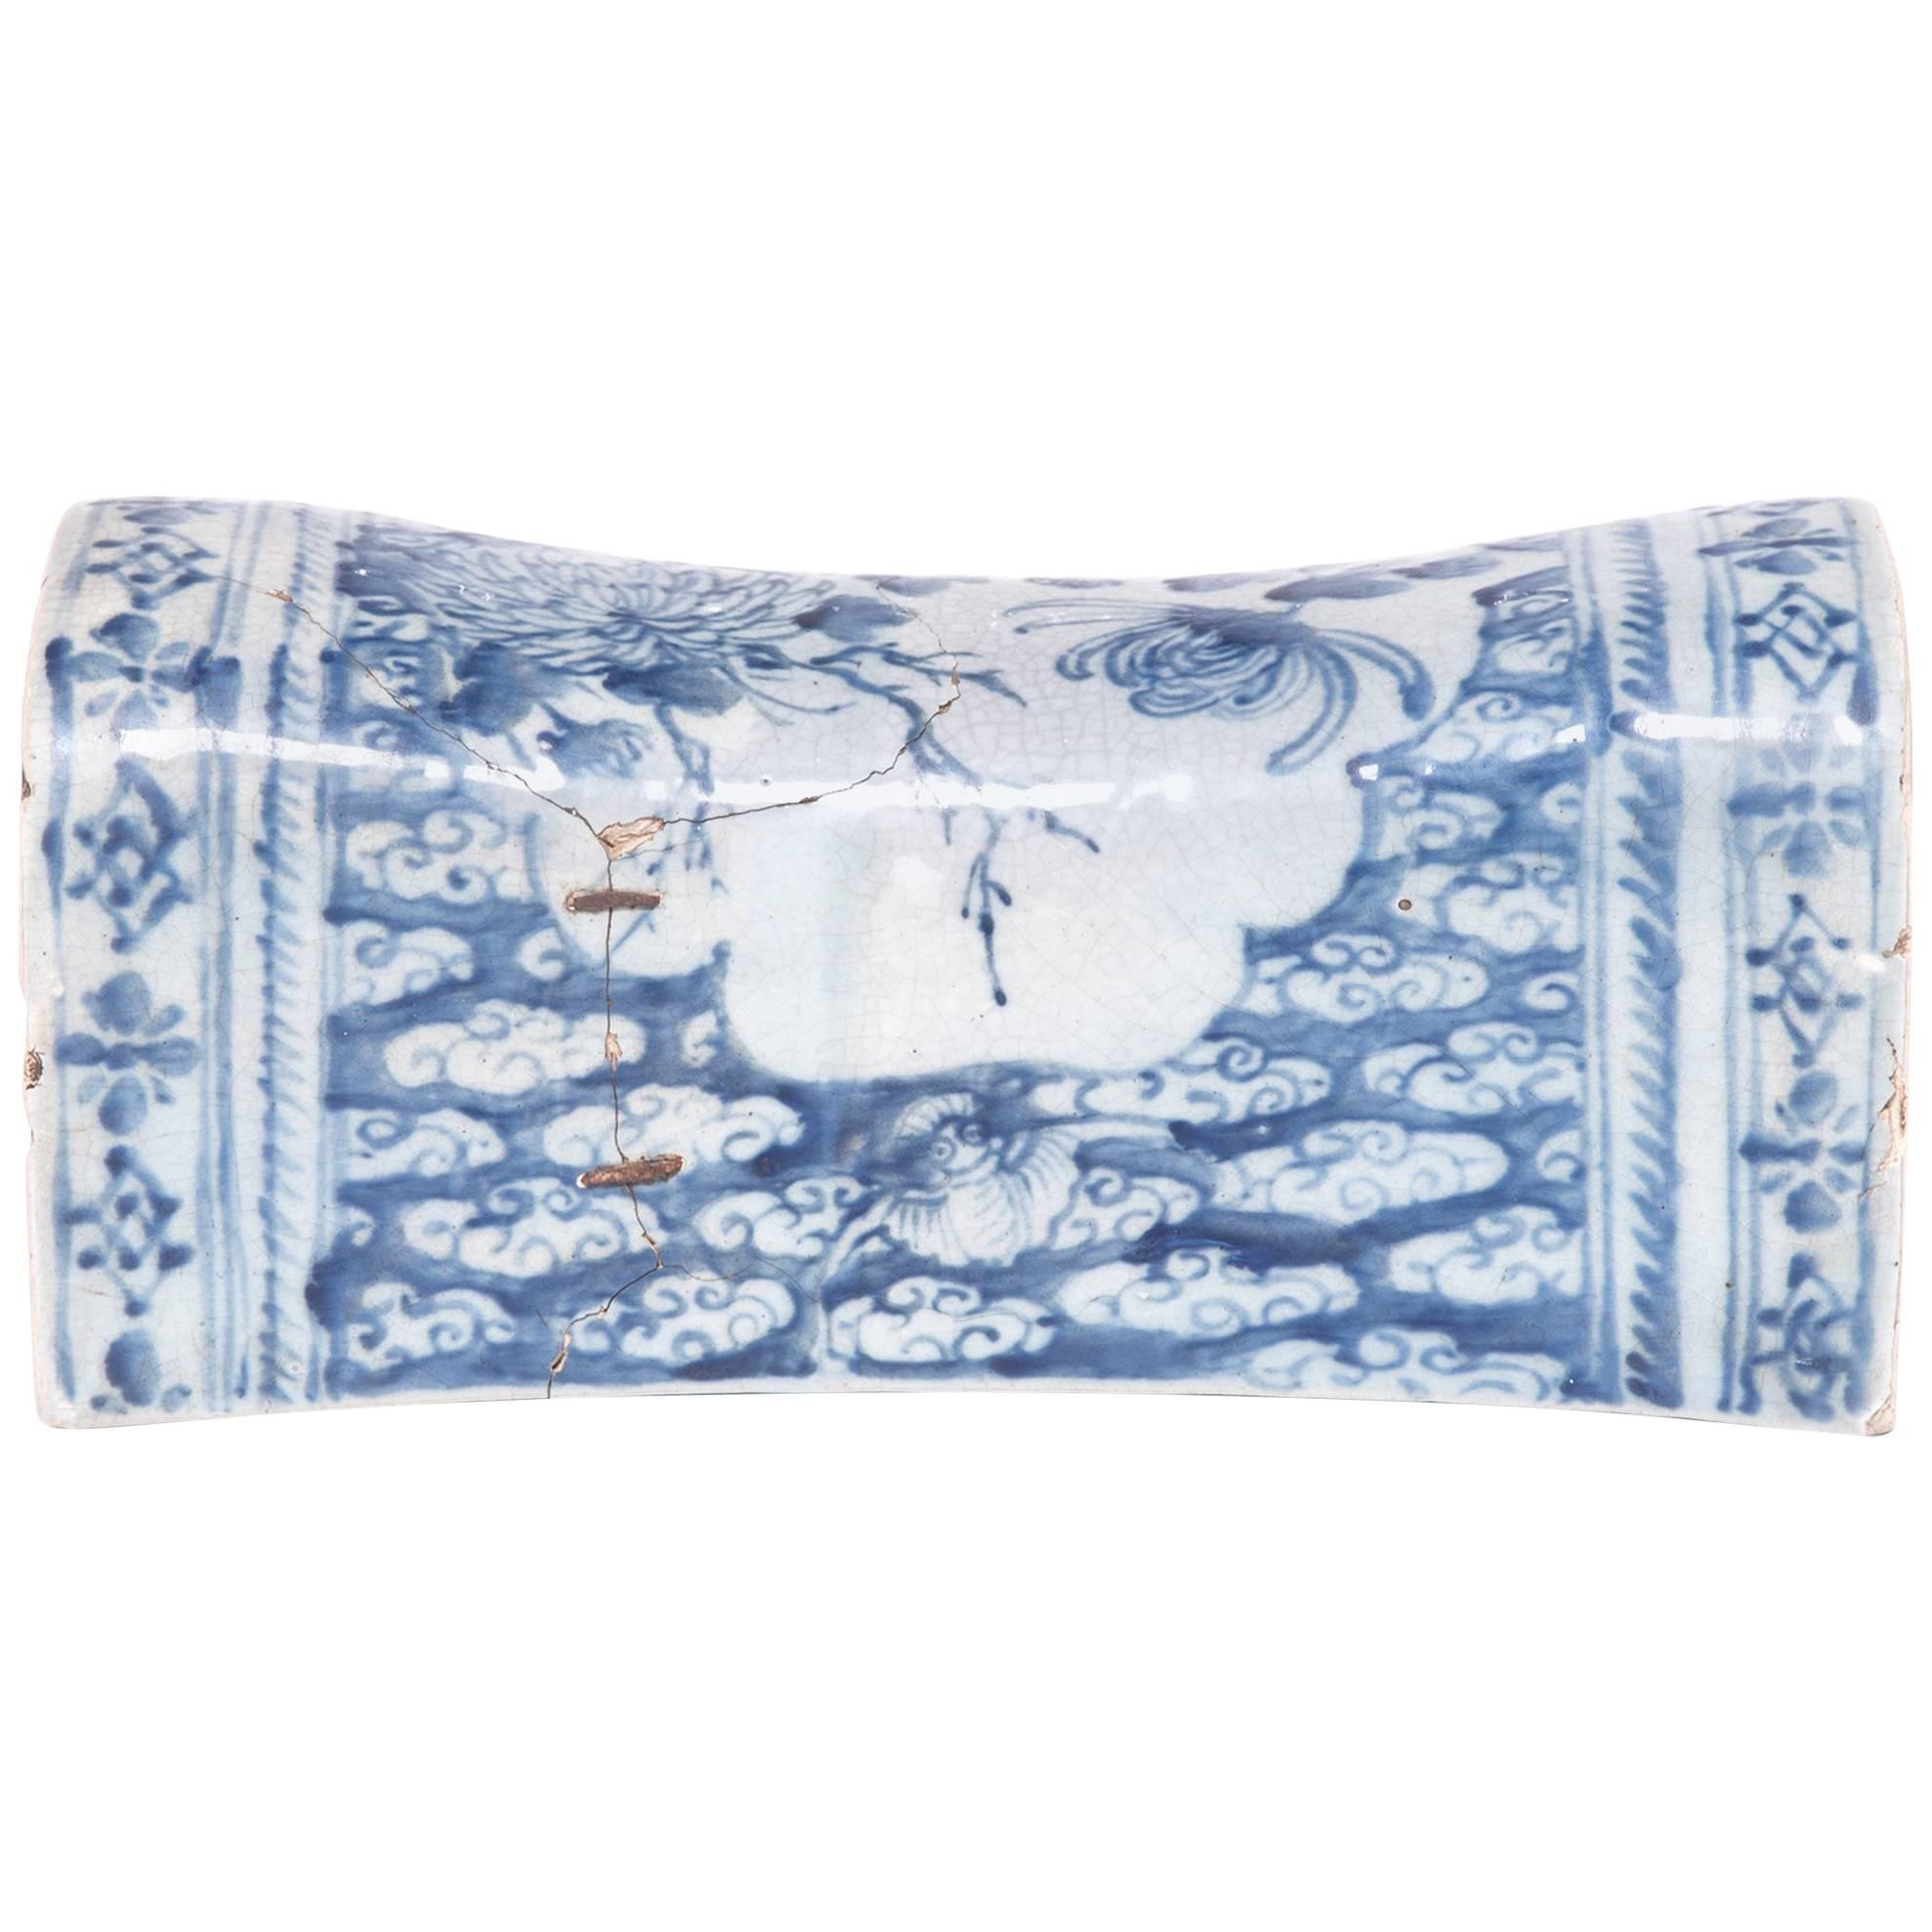 "Broken Dreams" 19th Century Chinese Blue and White Porcelain Neck Pillow